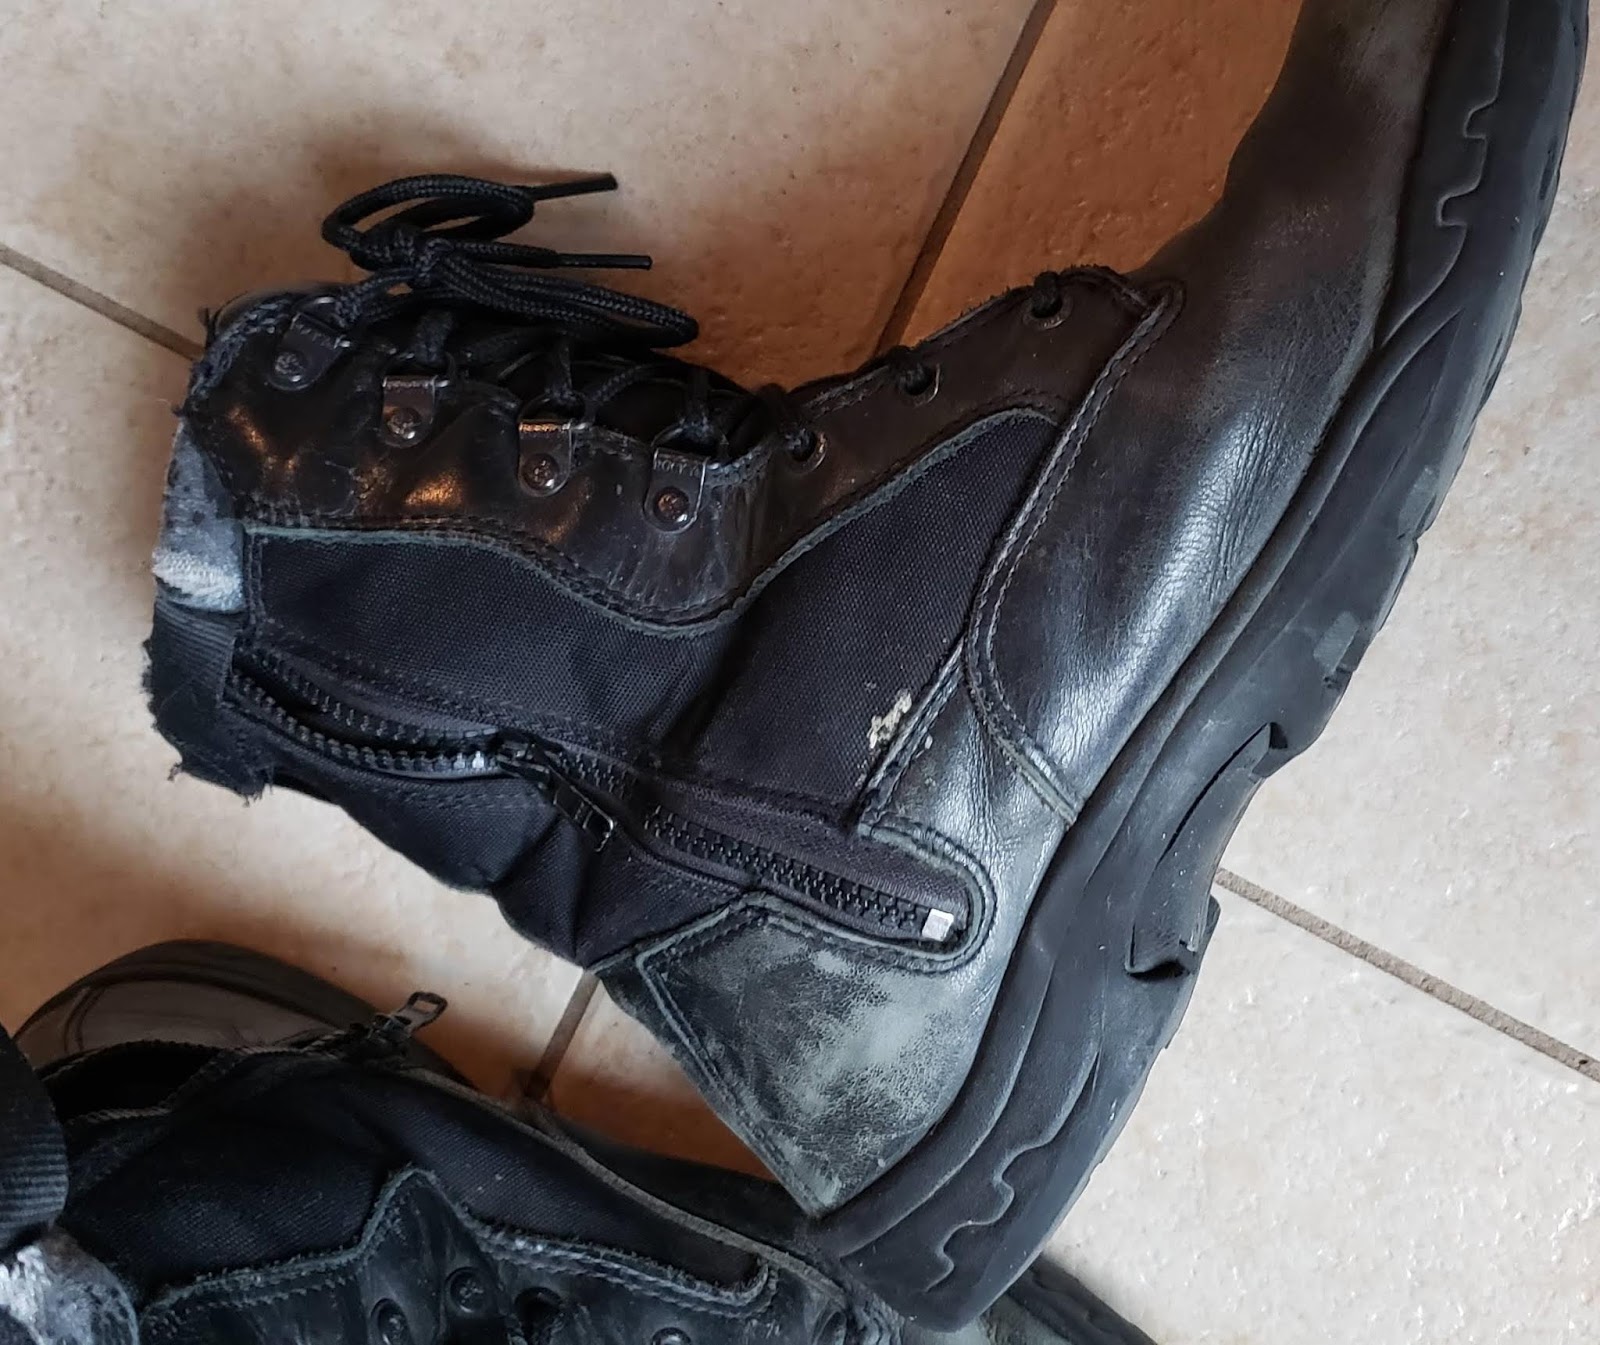 Ordinary Biker Oz: Best Waterproof Motorcycle Boots for Miles and Miles